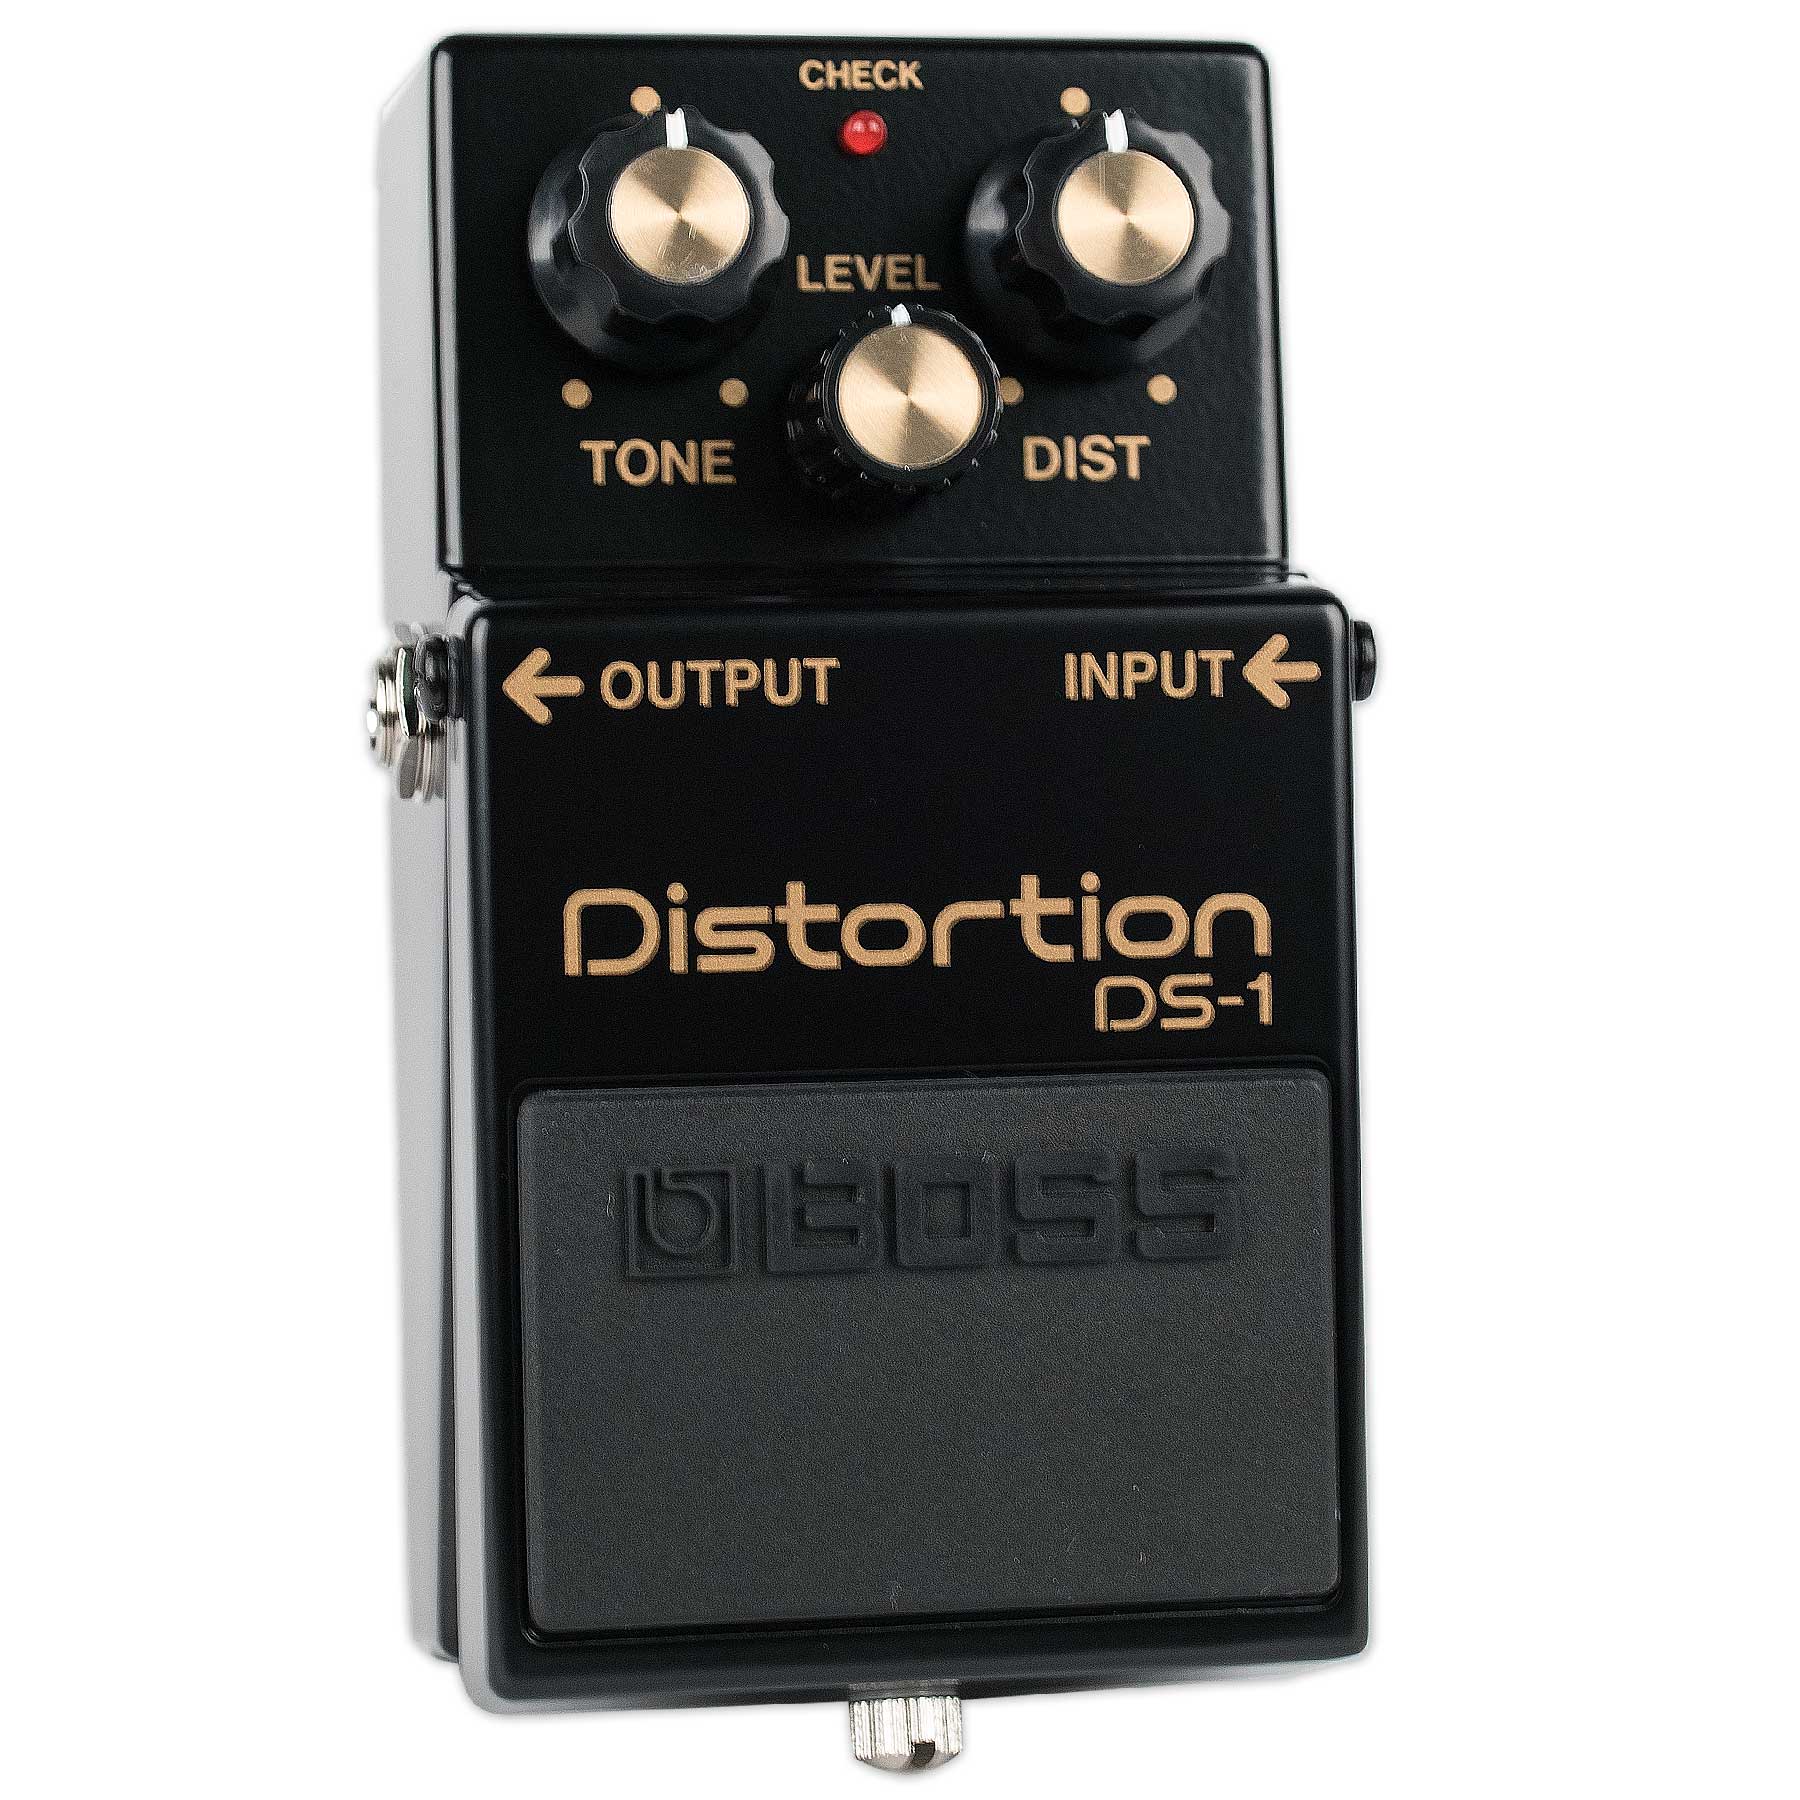 BOSS DS-1 DISTORTION 4A 40TH ANNIVERSARY